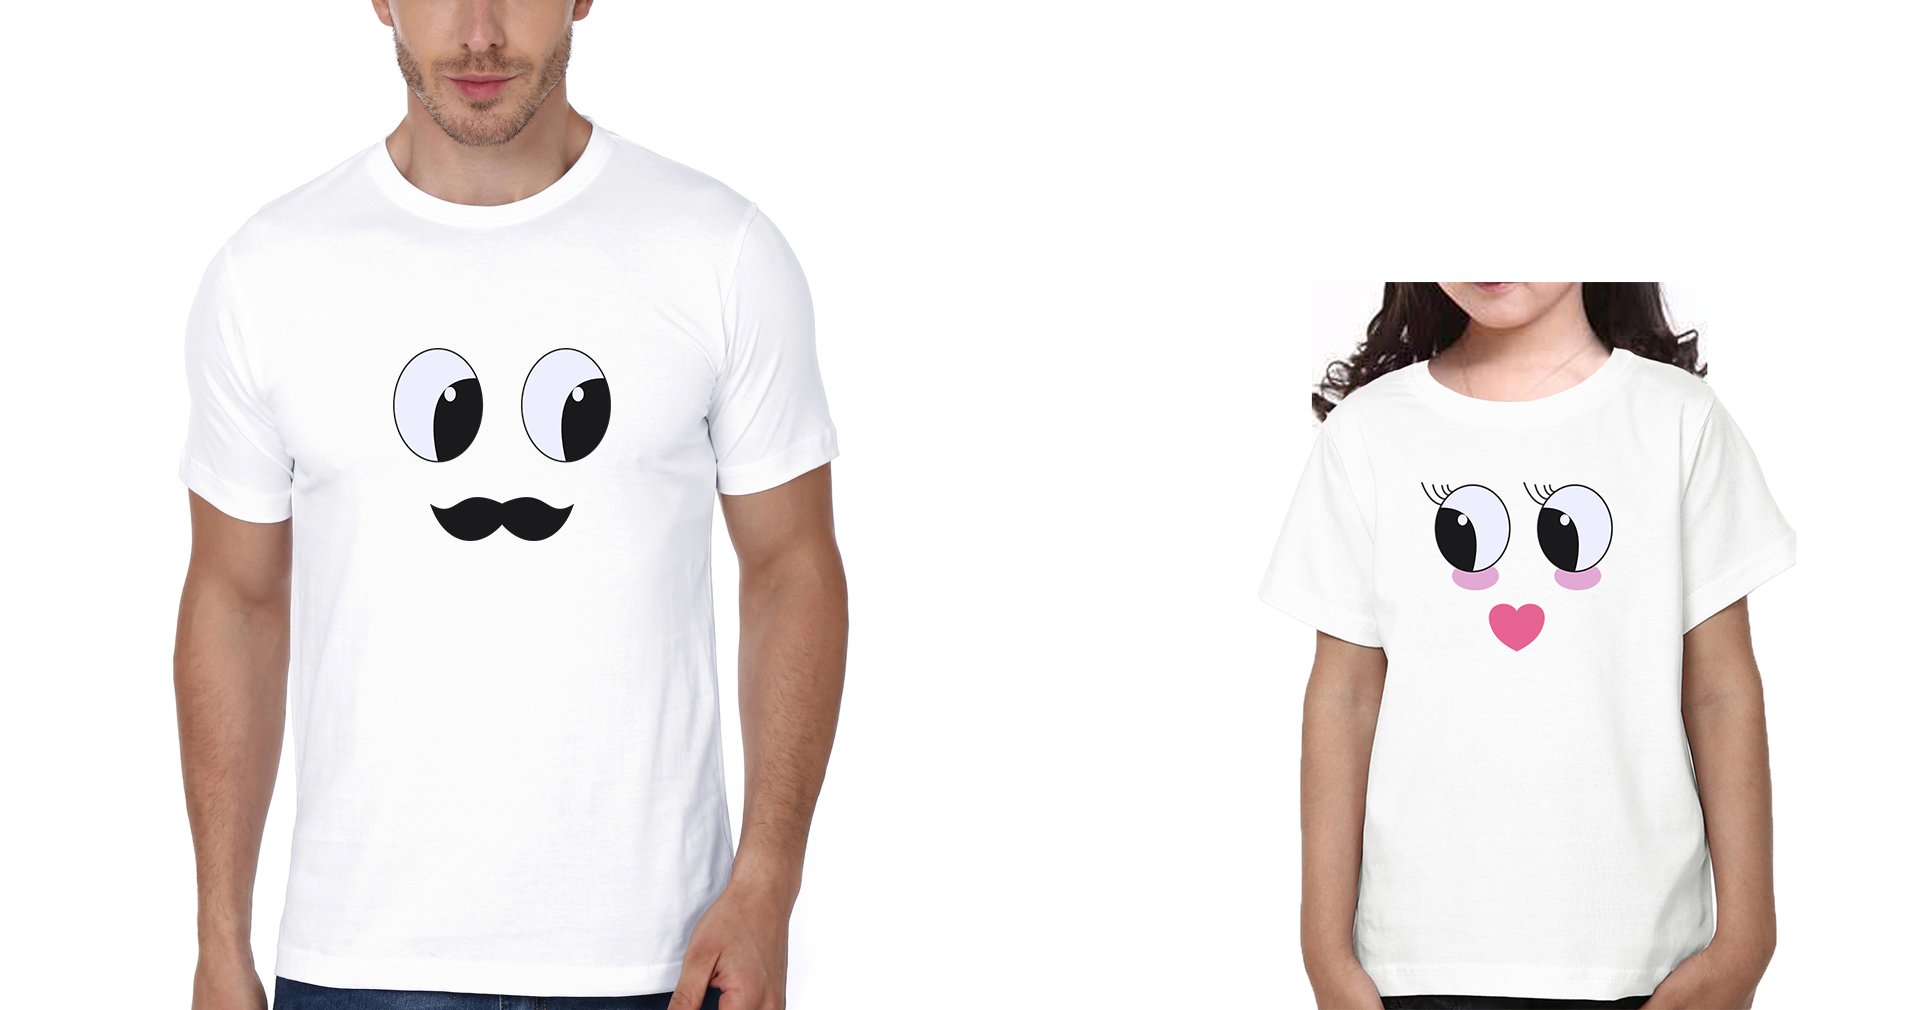 Eyes Lips Father and Daughter Matching T-Shirt- FunkyTeesClub